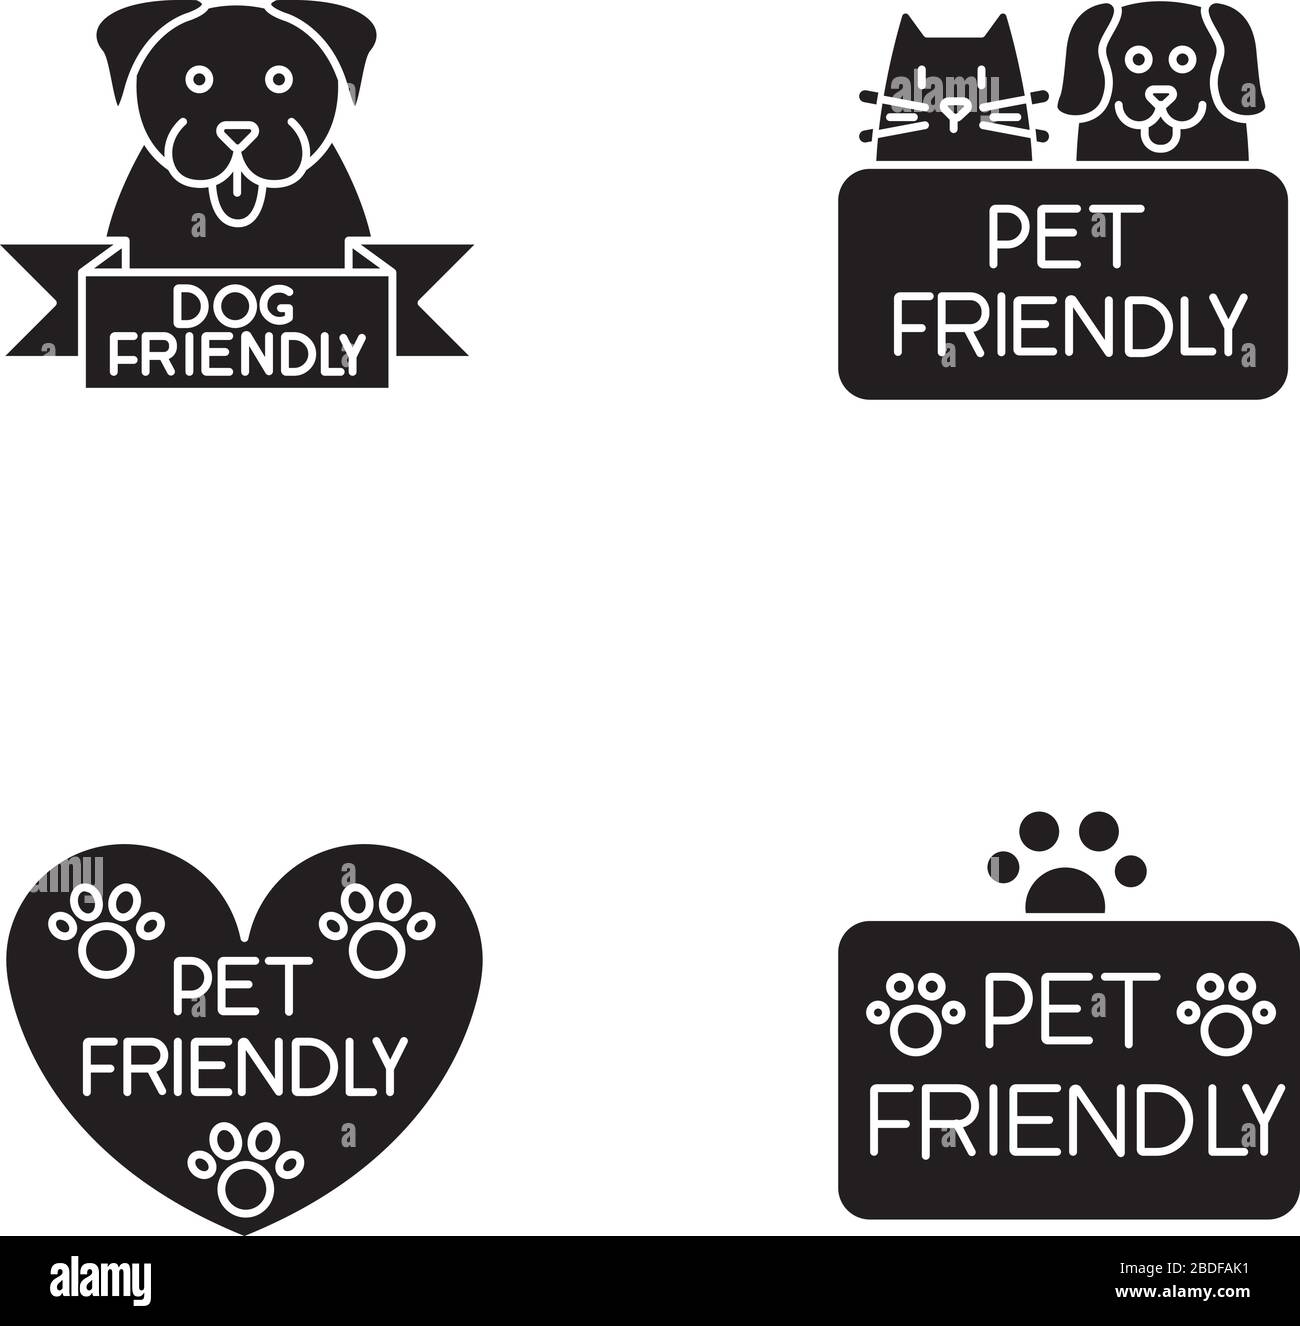 Pet friendly service black glyph icons set on white space. Four-legged friends grooming salon. Domestic animals care, cats and dogs allowed areas Stock Vector